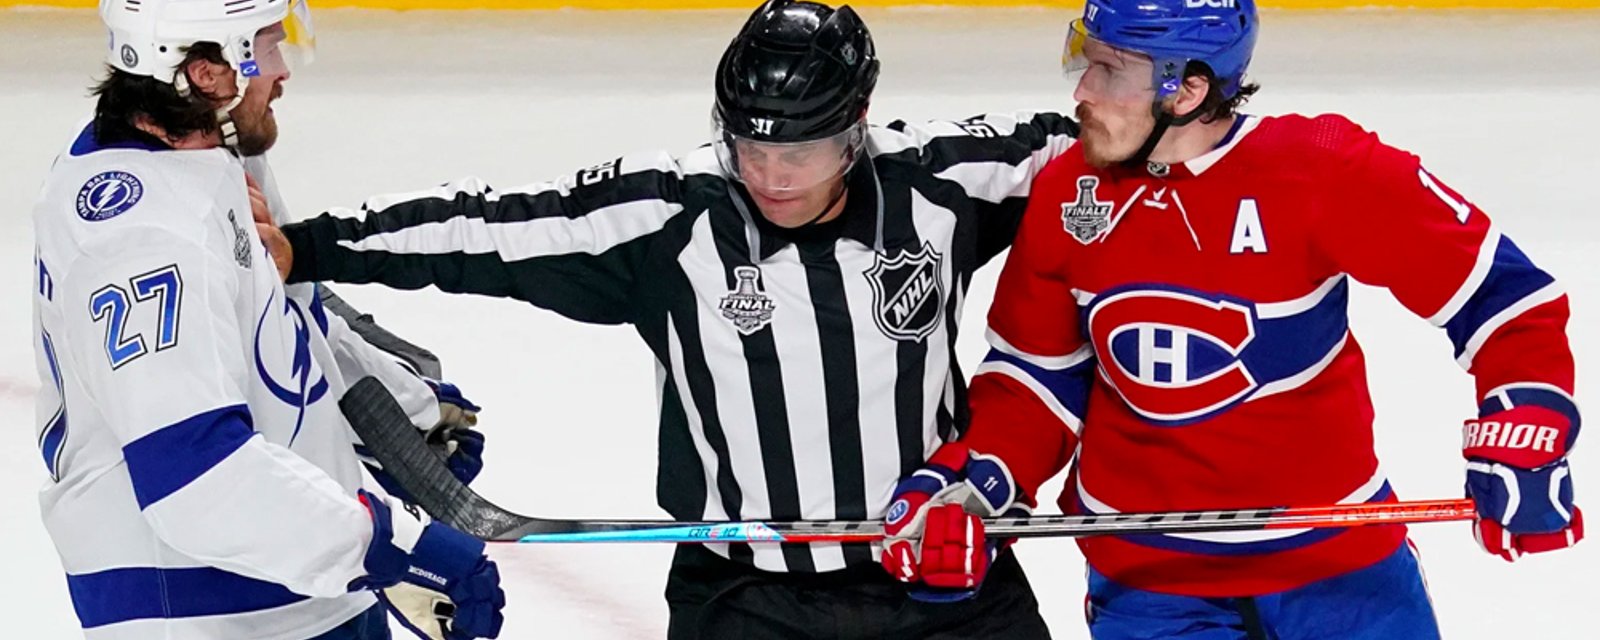 Brendan Gallagher returns home to Montreal to find that he has been robbed